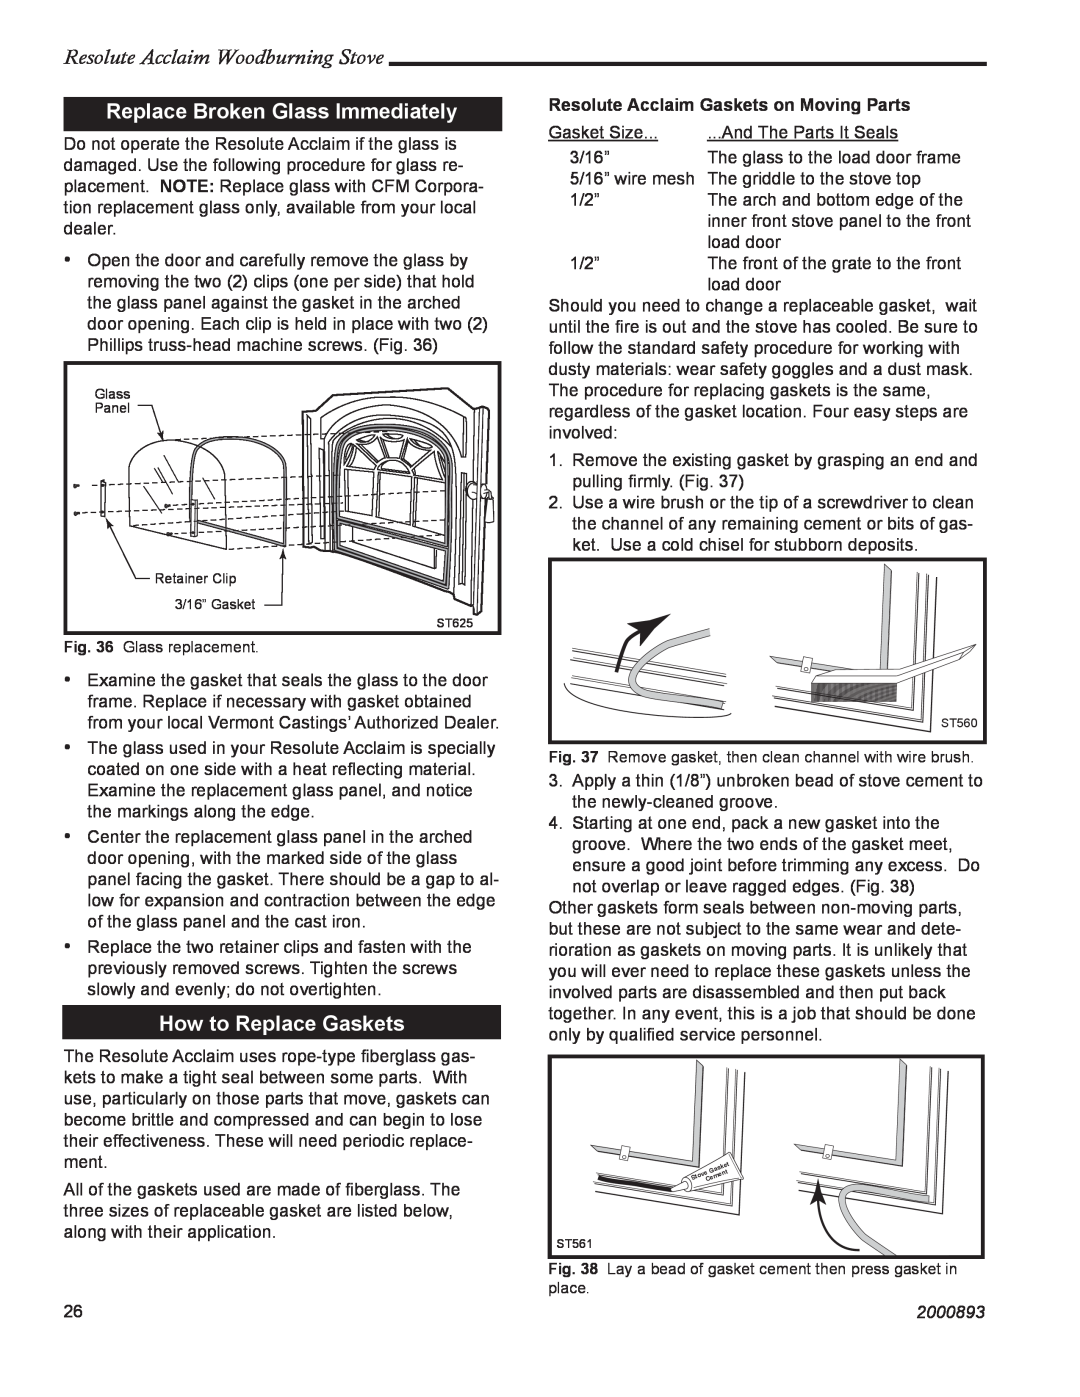 Vermont Casting 2490 Replace Broken Glass Immediately, How to Replace Gaskets, Resolute Acclaim Woodburning Stove, 2000893 